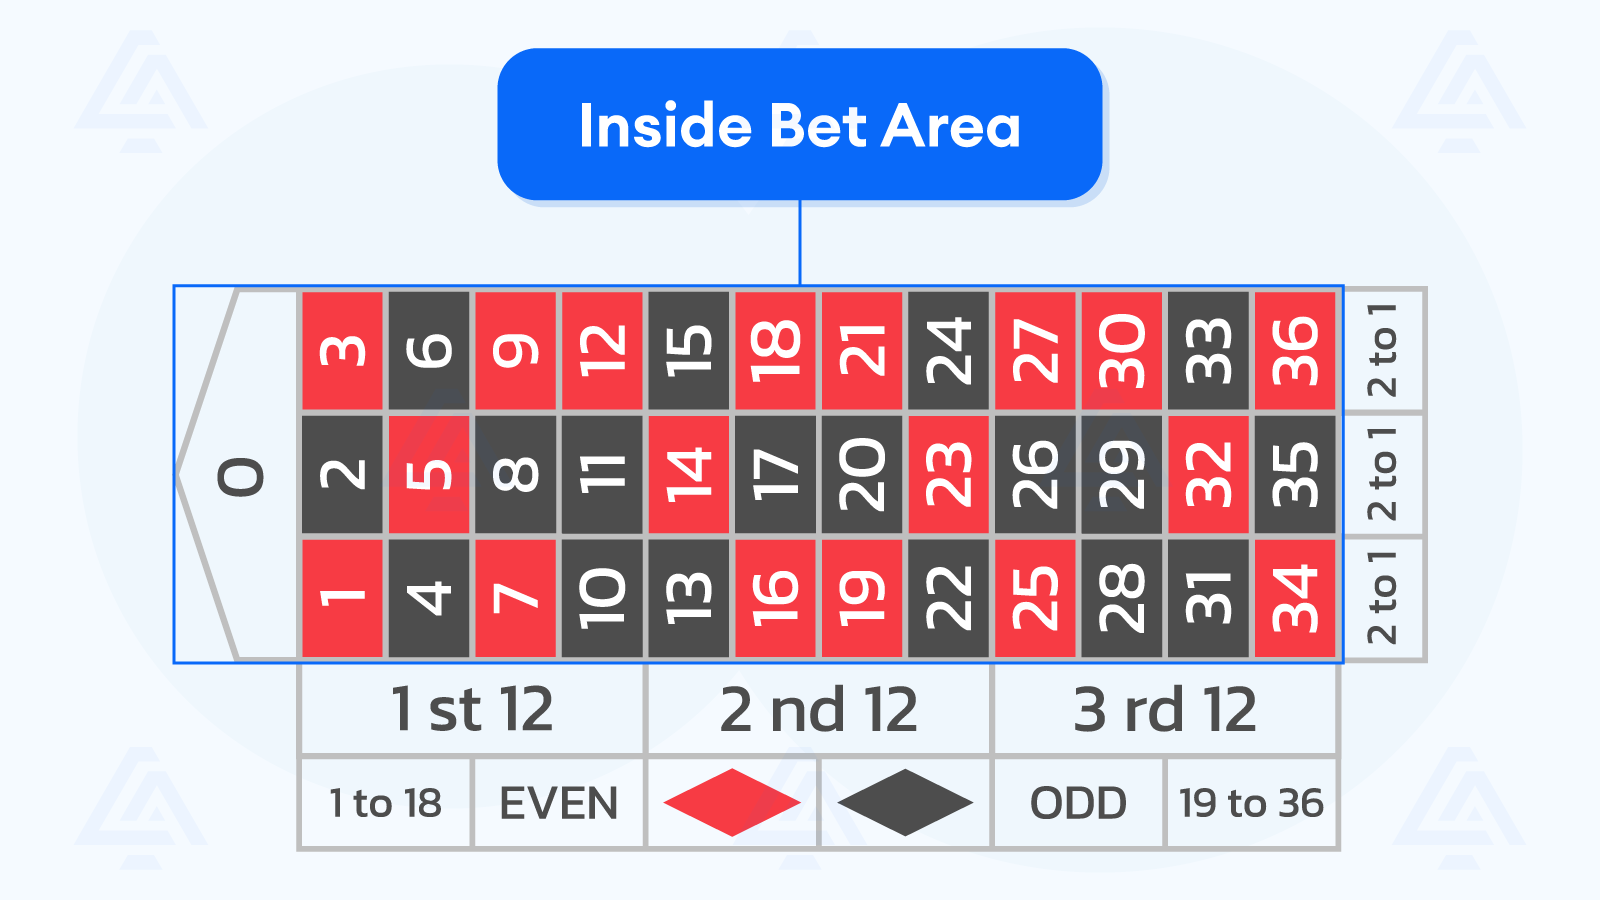 Inside Bet Area on the Roulette Table